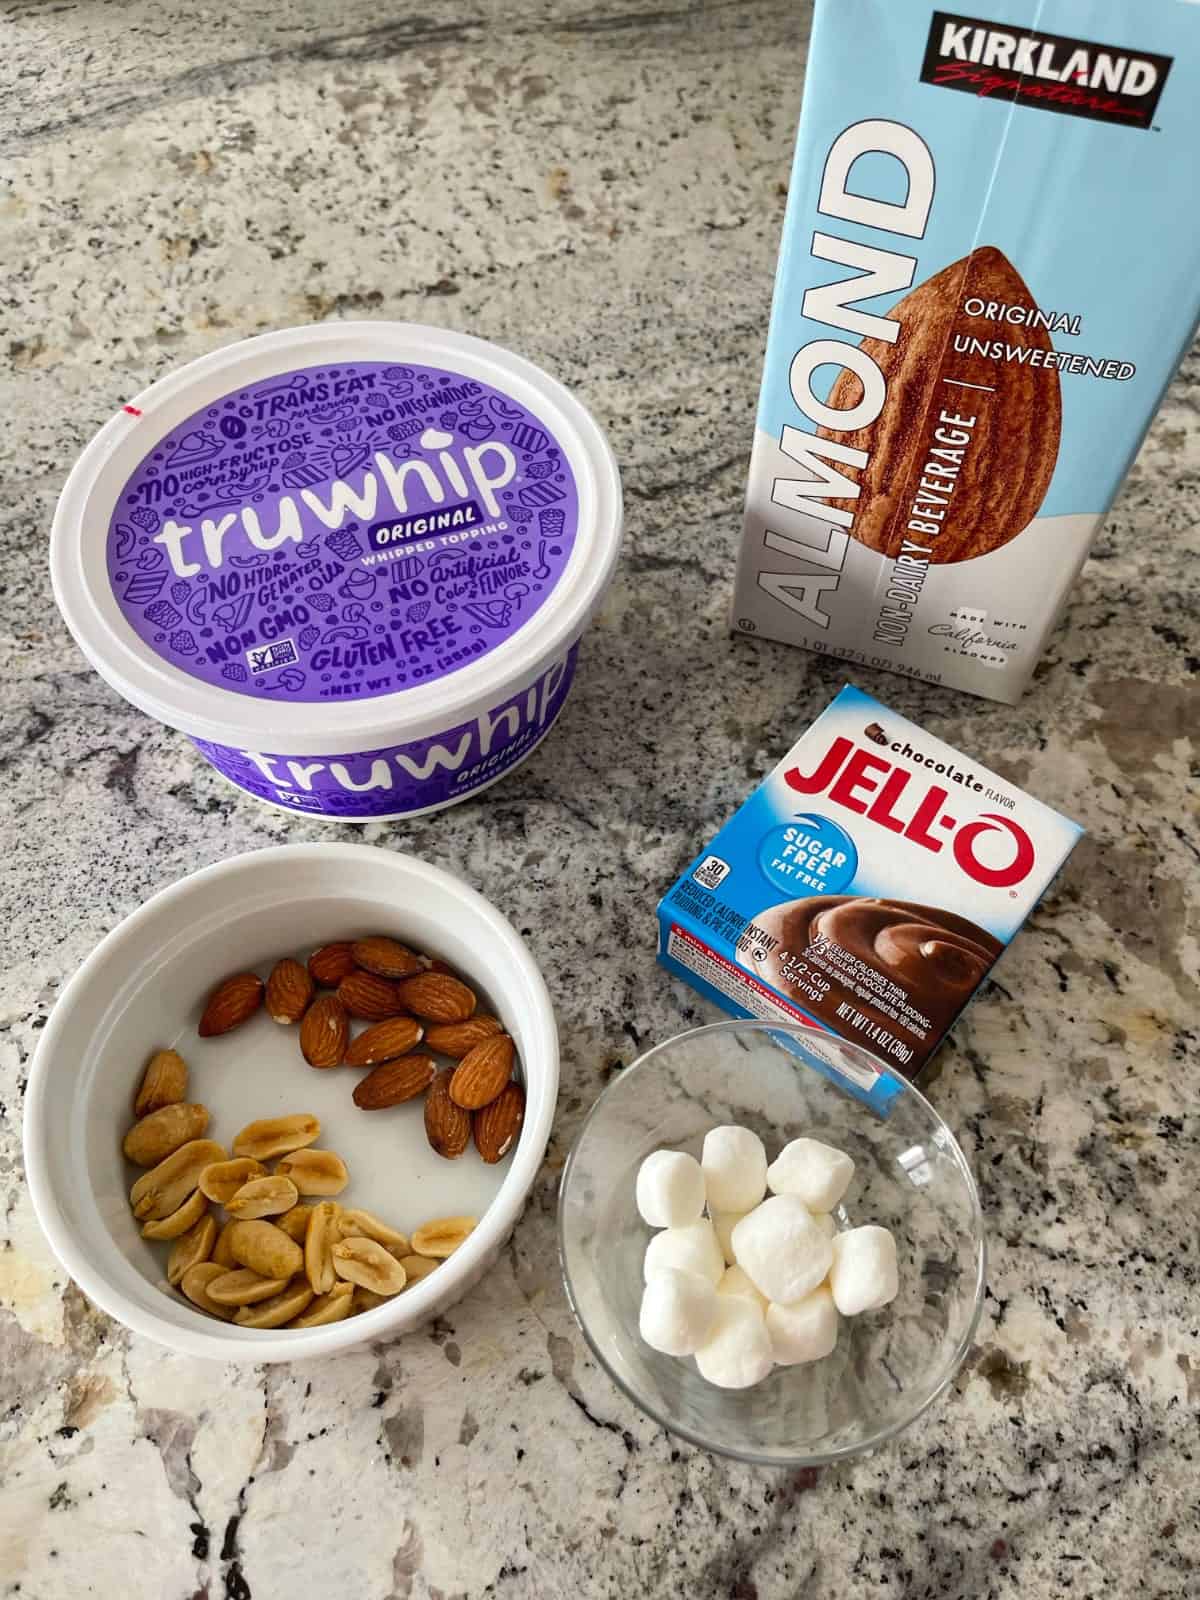 Ingredients for making rocky road pudding parfaits including almond milk, Truwhip, mini marshmallows, nuts and sugar-free instant chocolate jello pudding mix.